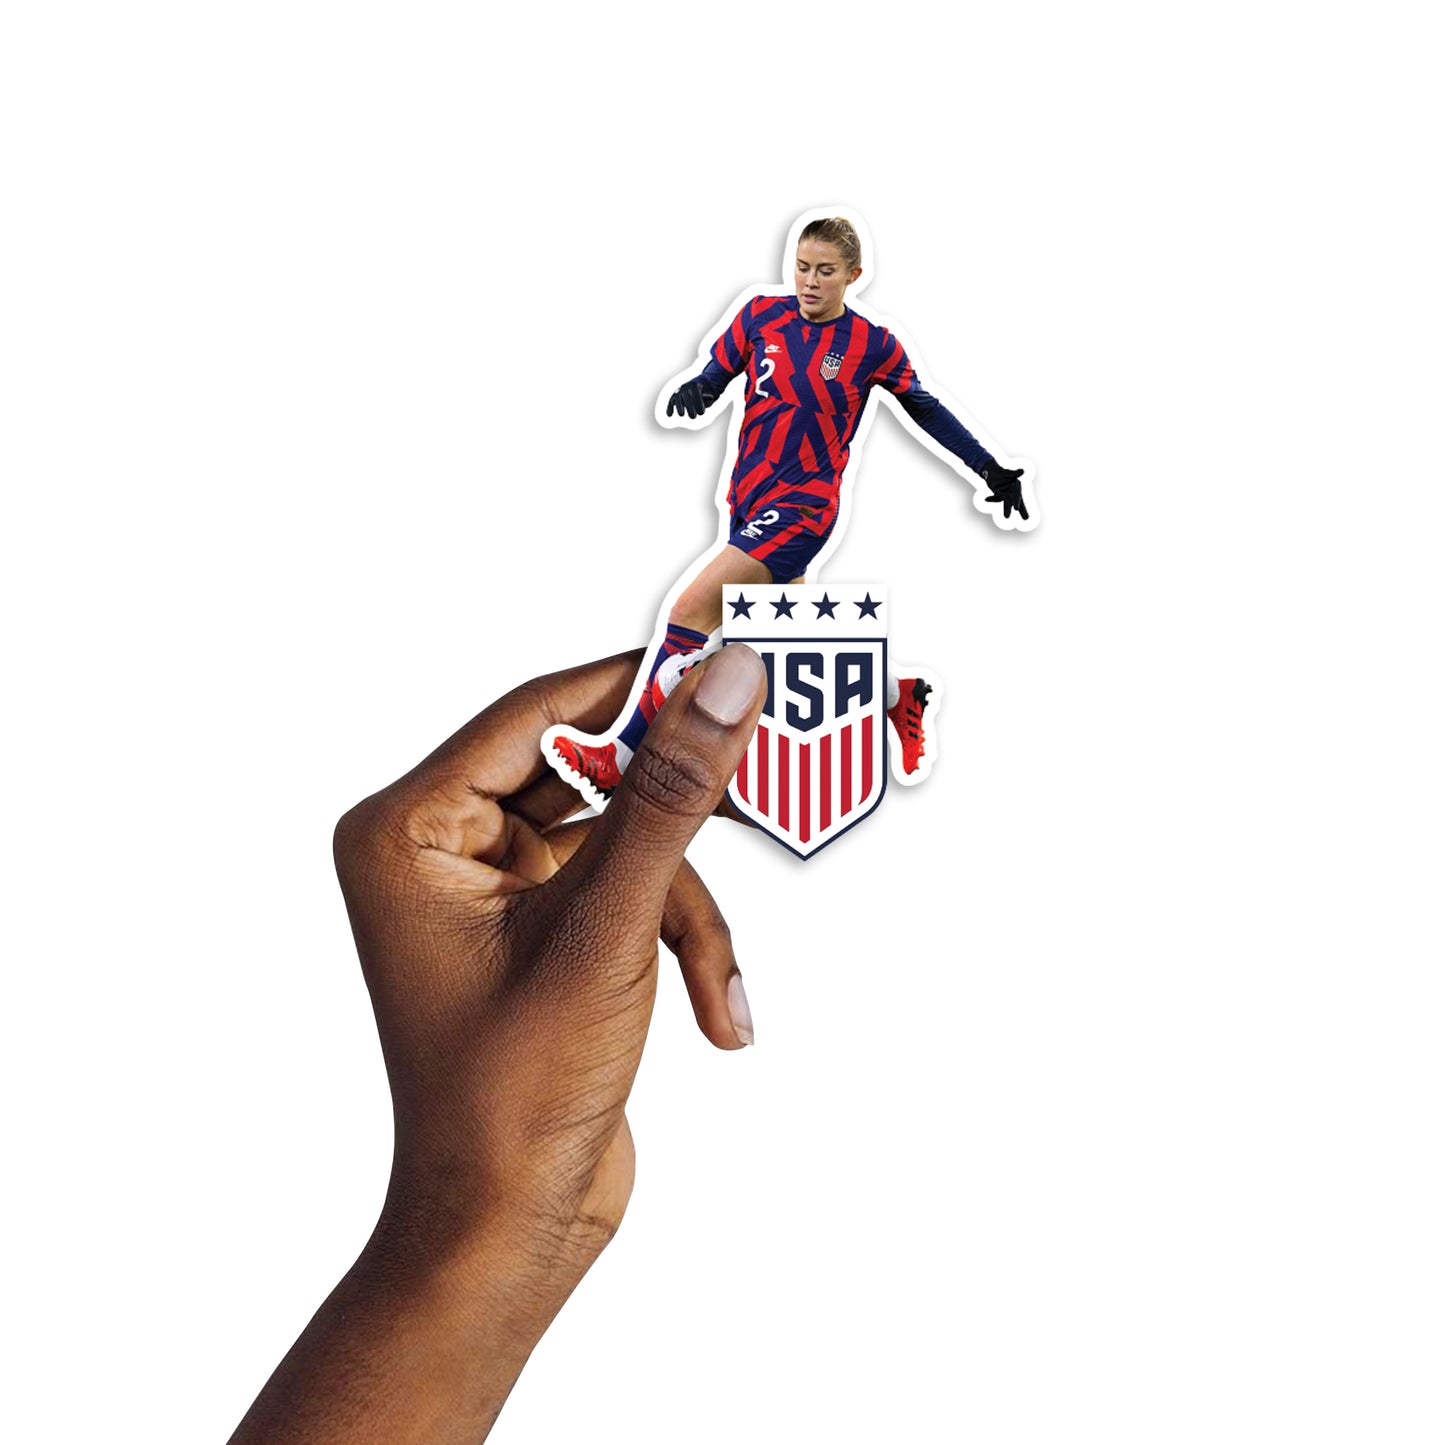 Sheet of 5 -Abby Dahlkemper Player Minis - Officially Licensed USWNT Removable Adhesive Decal